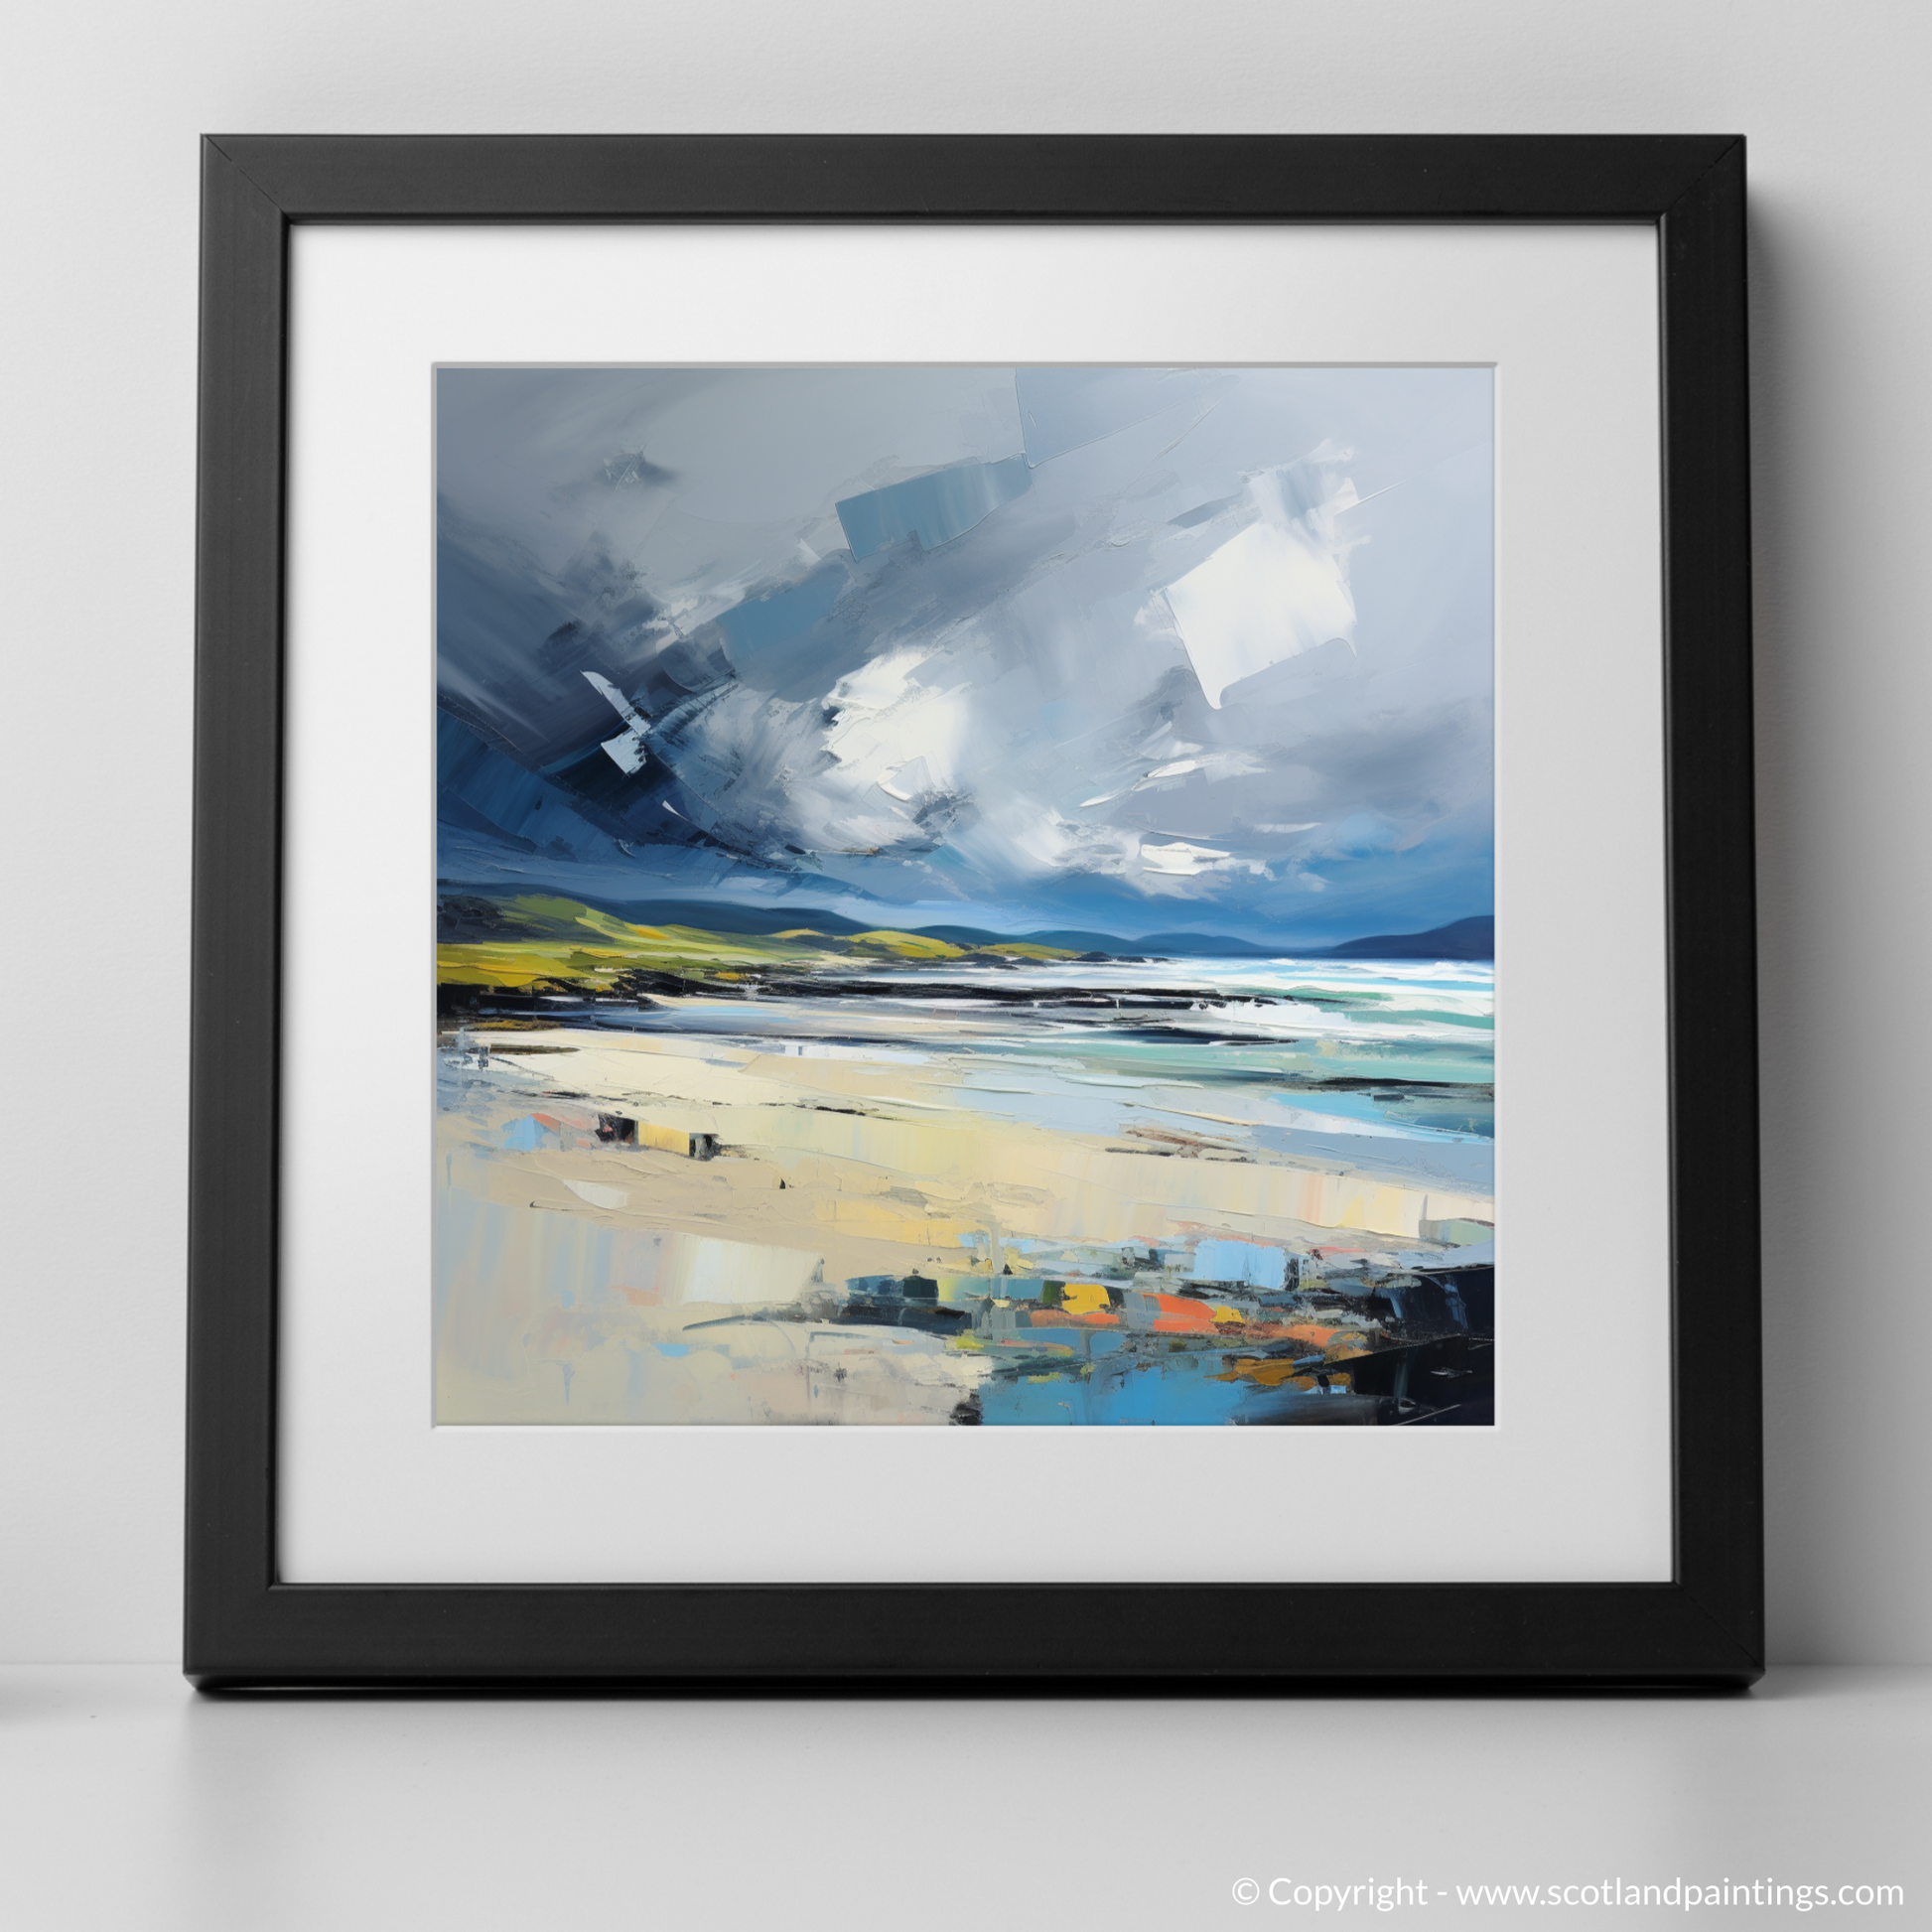 Art Print of Scarista Beach with a stormy sky with a black frame